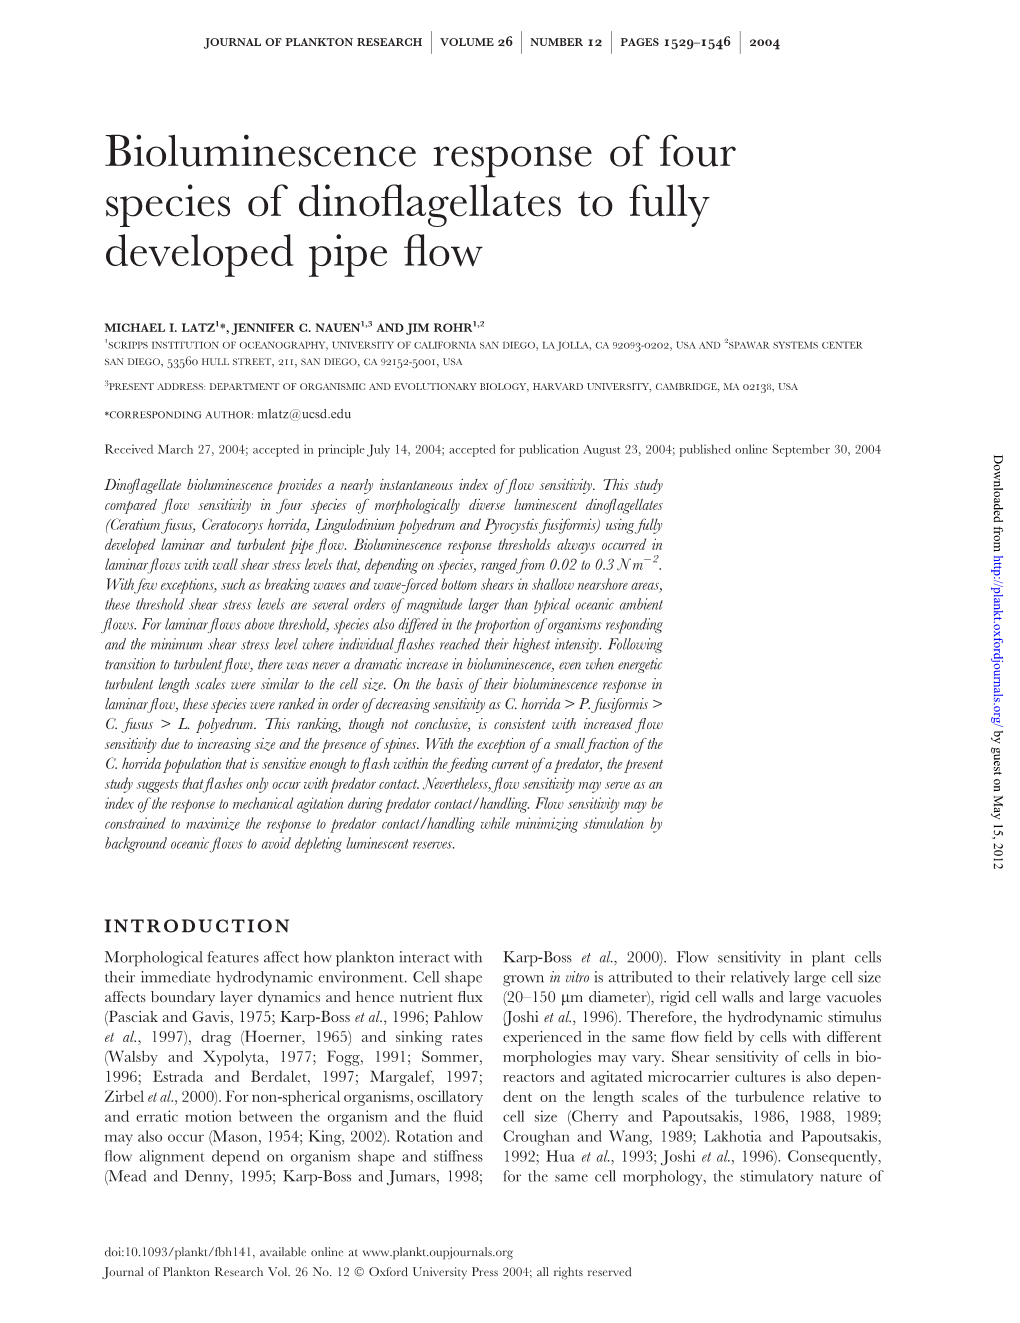 Bioluminescence Response of Four Species of Dinoflagellates to Fully Developed Pipe Flow